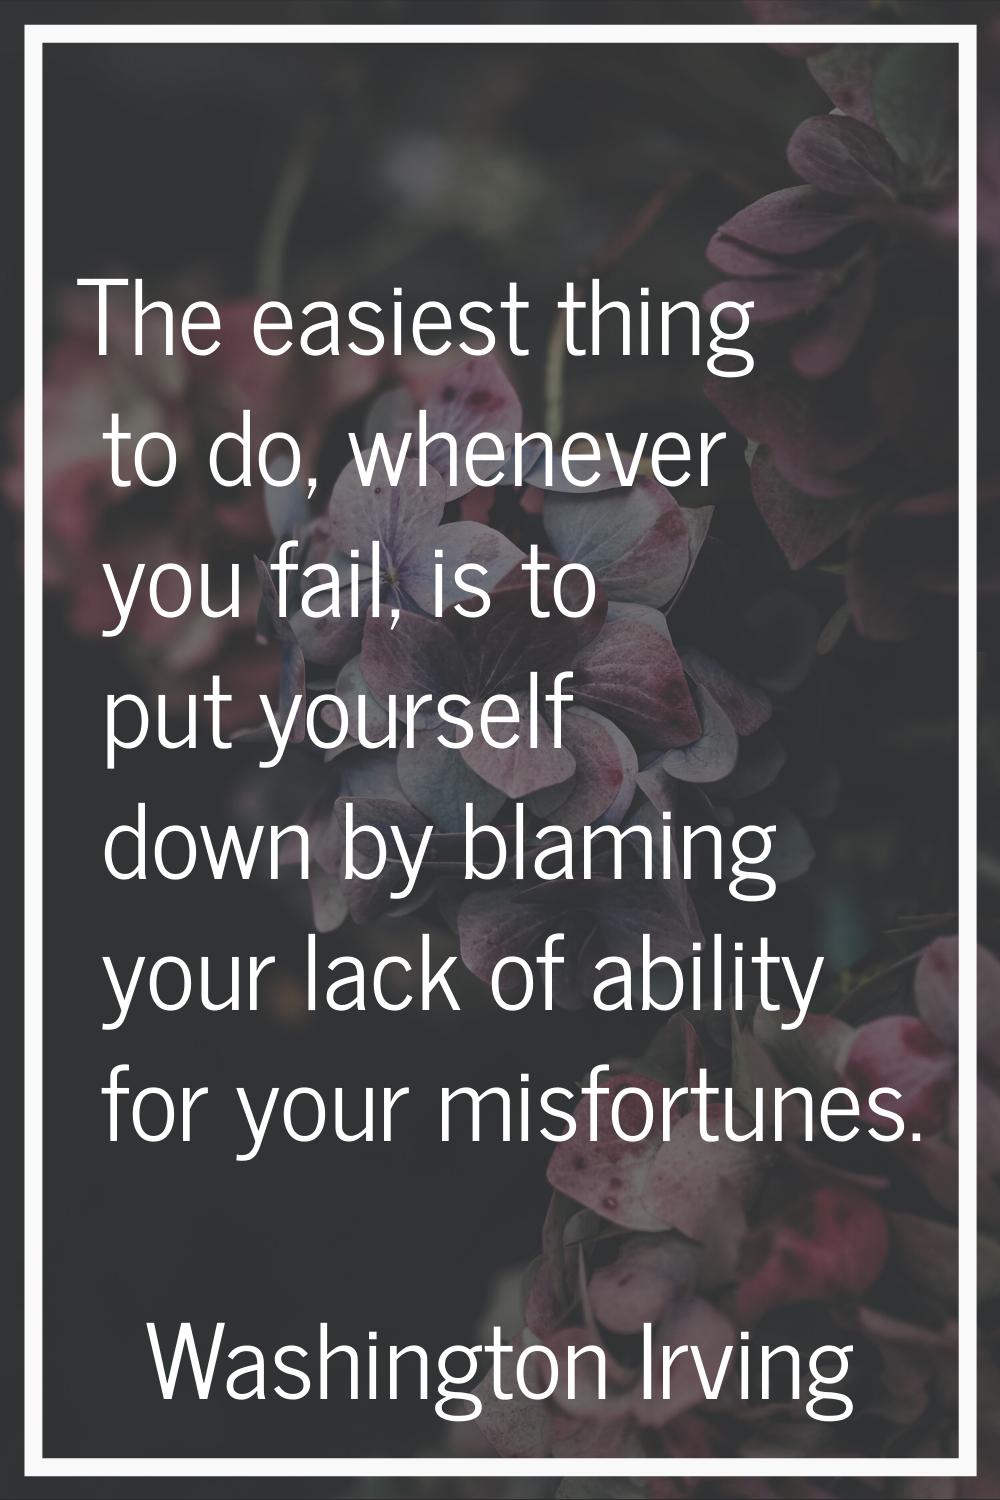 The easiest thing to do, whenever you fail, is to put yourself down by blaming your lack of ability